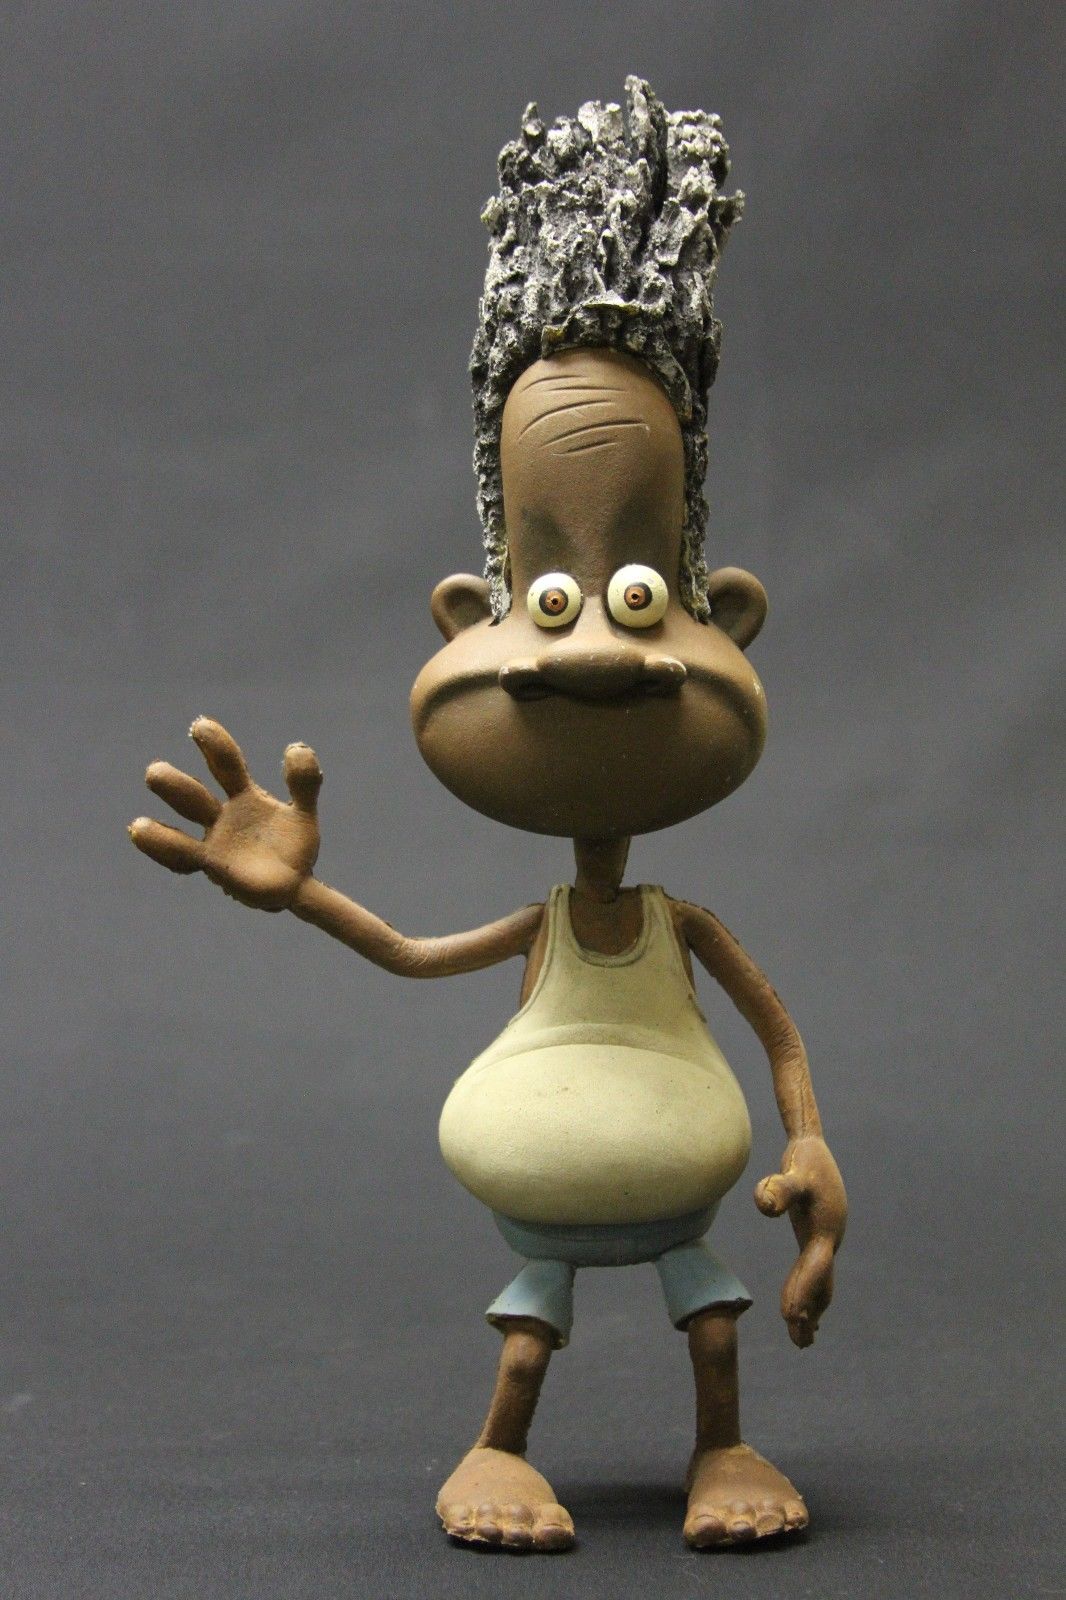 Thurgood Stop Motion Animation Puppet From Will Vintons Eddie Murphys The PJ's